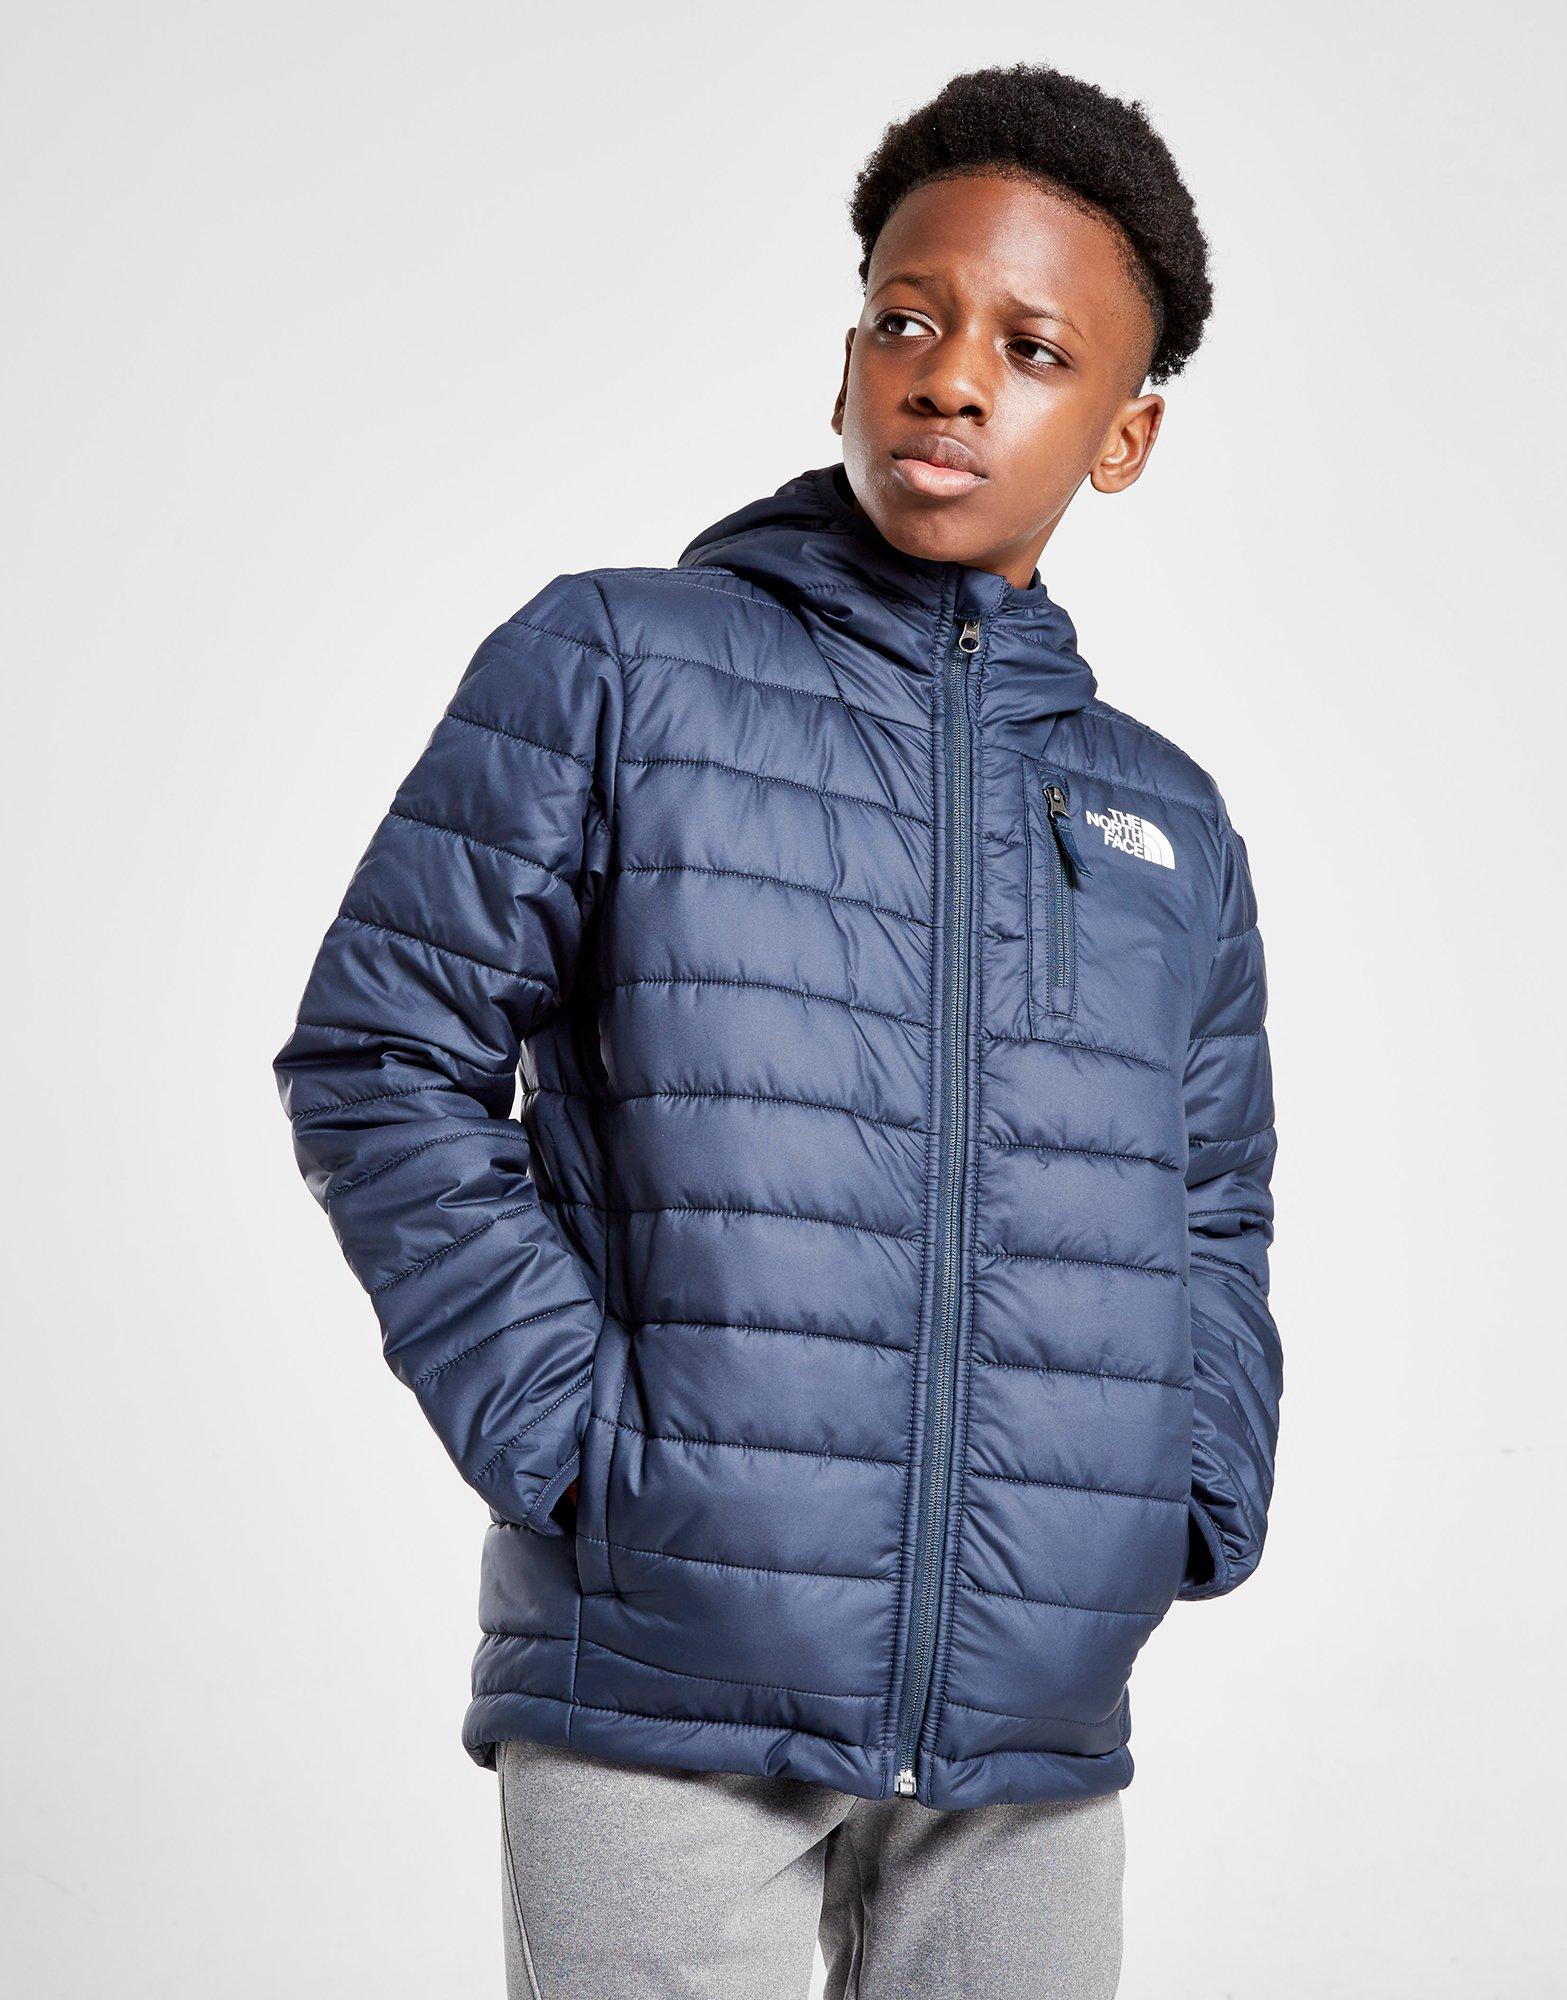 grey and blue north face jacket